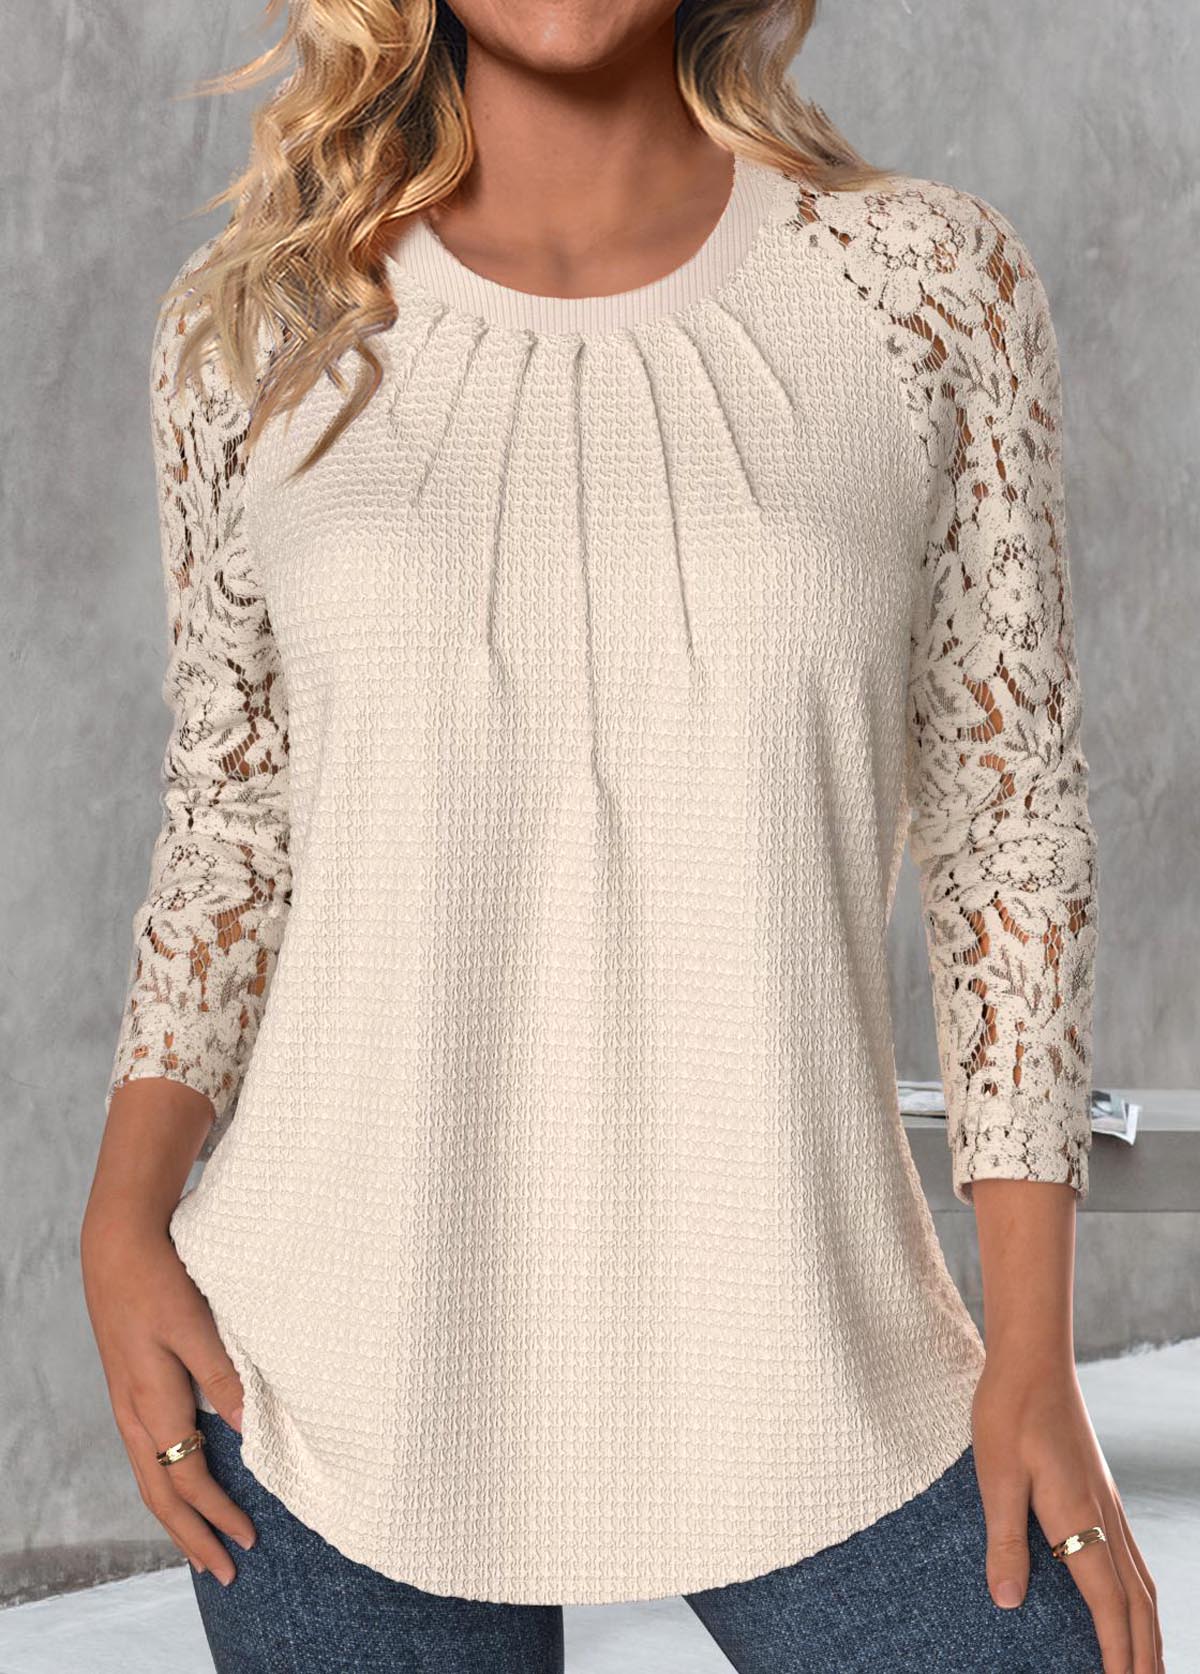 ROTITA Lace Skin Color Round Neck Long Sleeve T Shirt